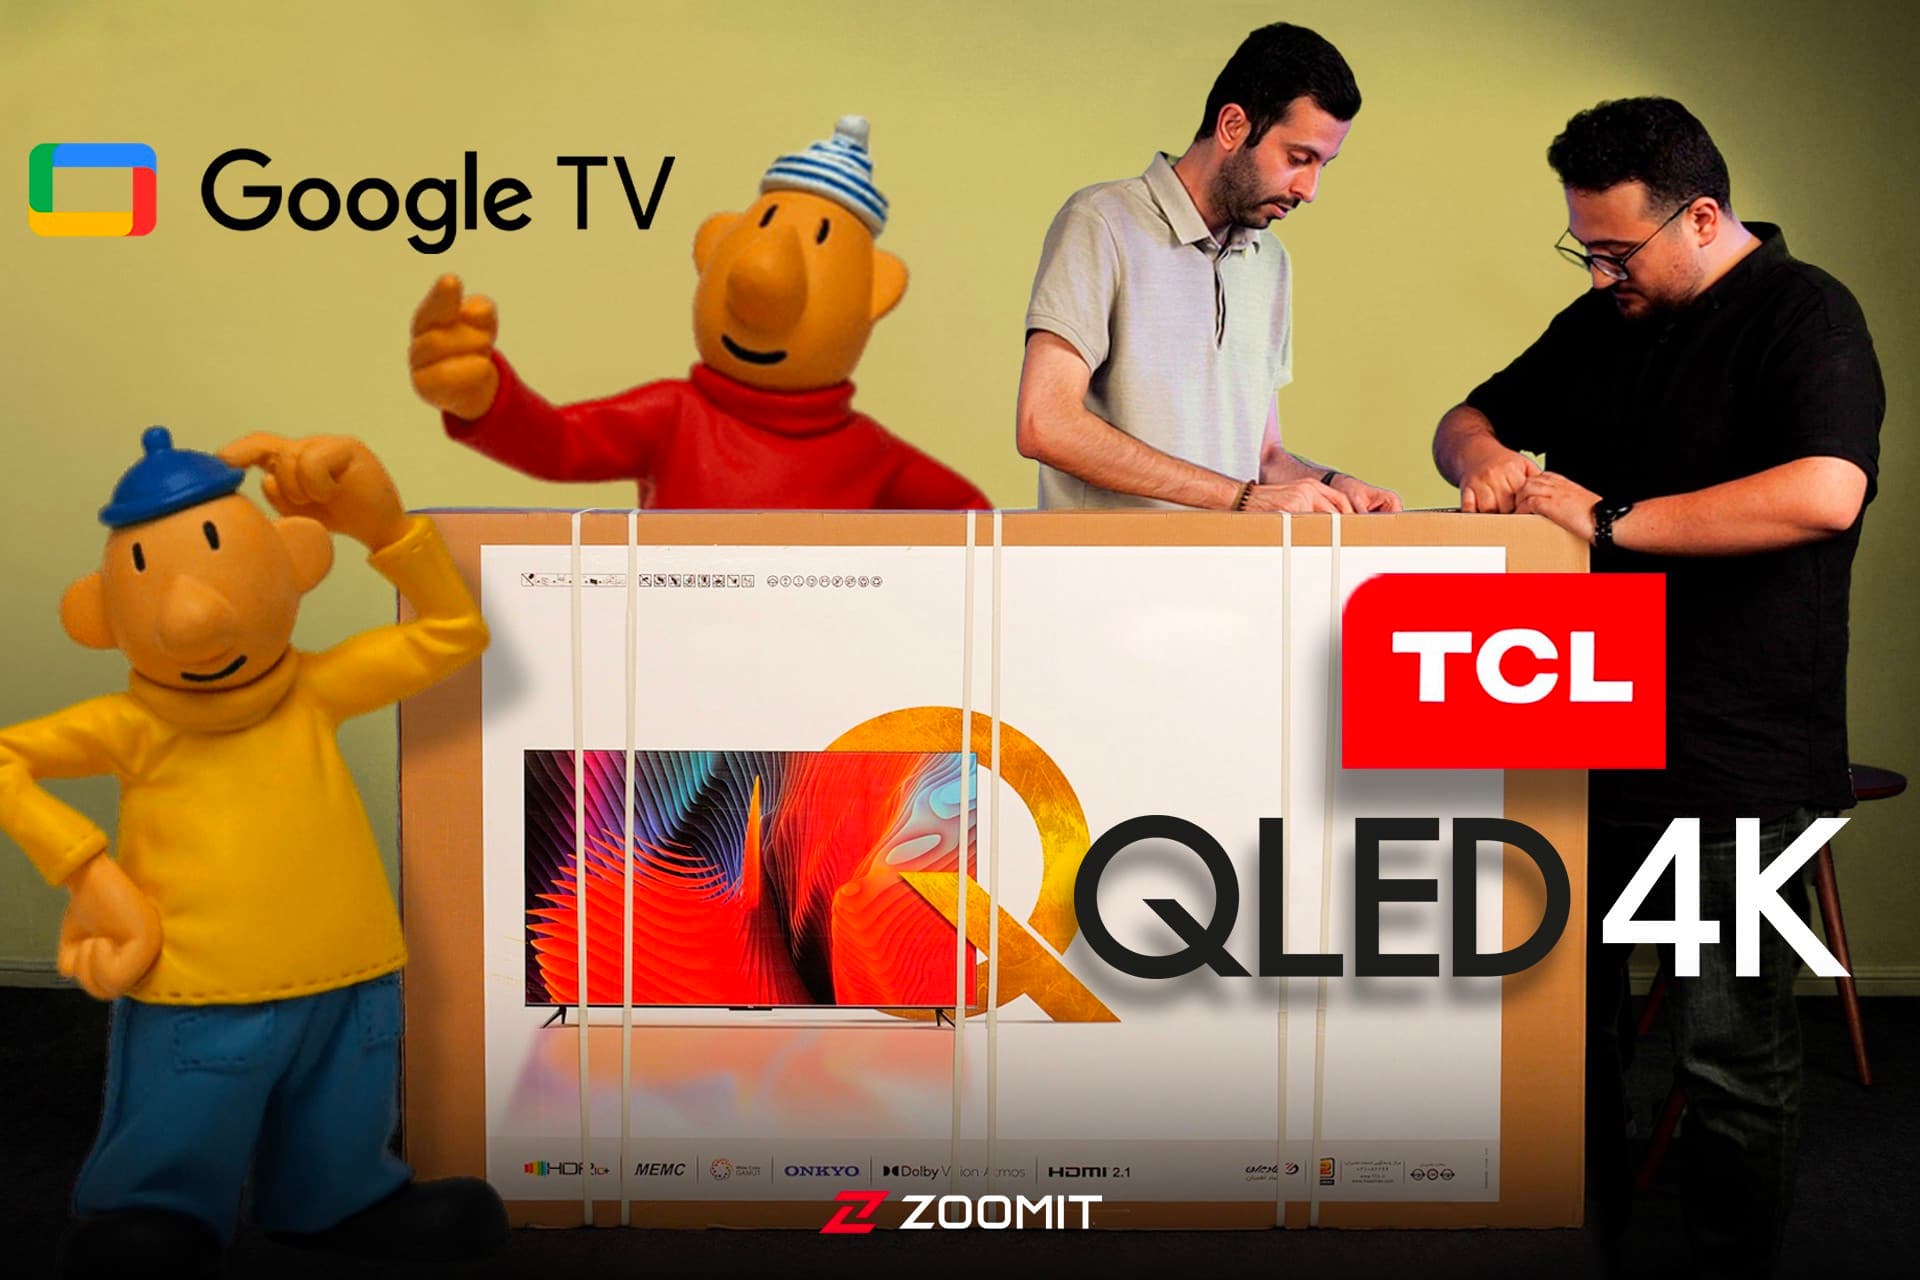 tcl new 4k qled tv zoomit 64c9362e52098c84152ebbe0